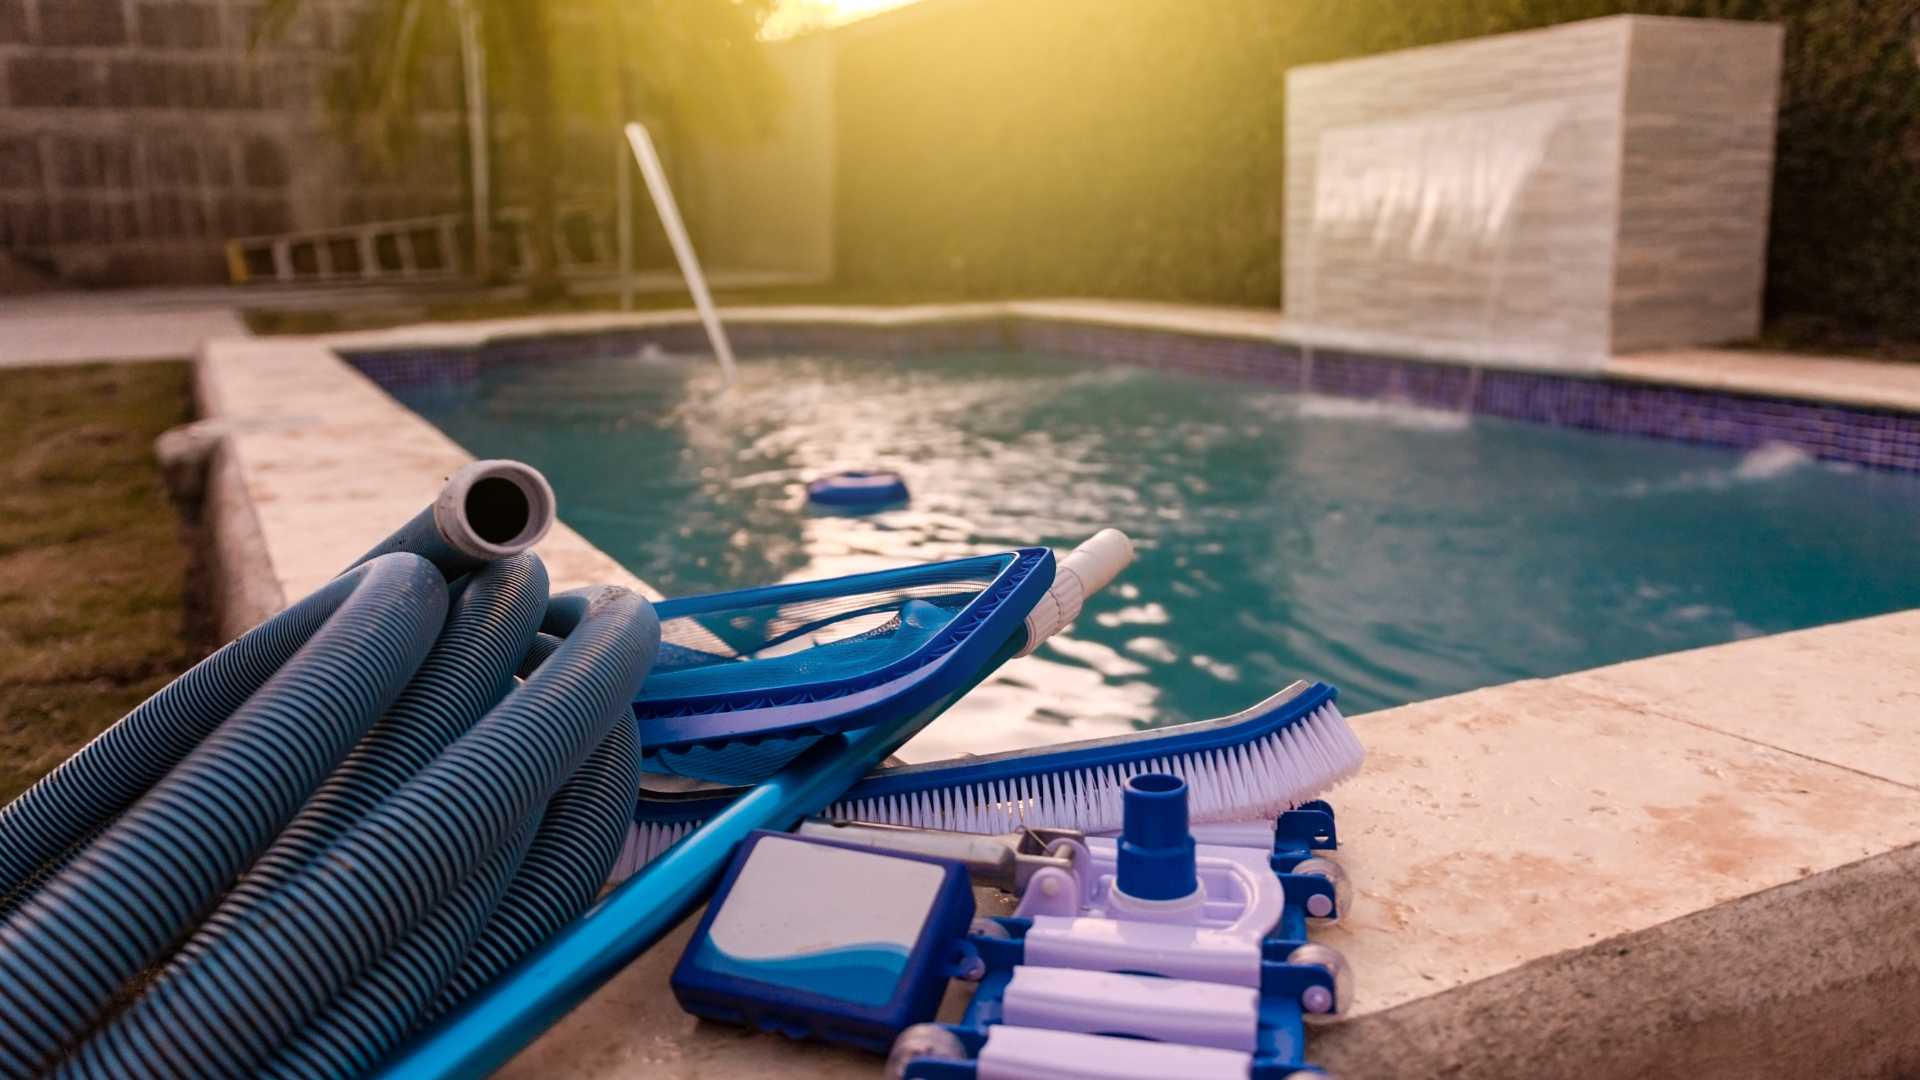 Pool cleaning tools next to pool at sunset. Comprehensive winterization.